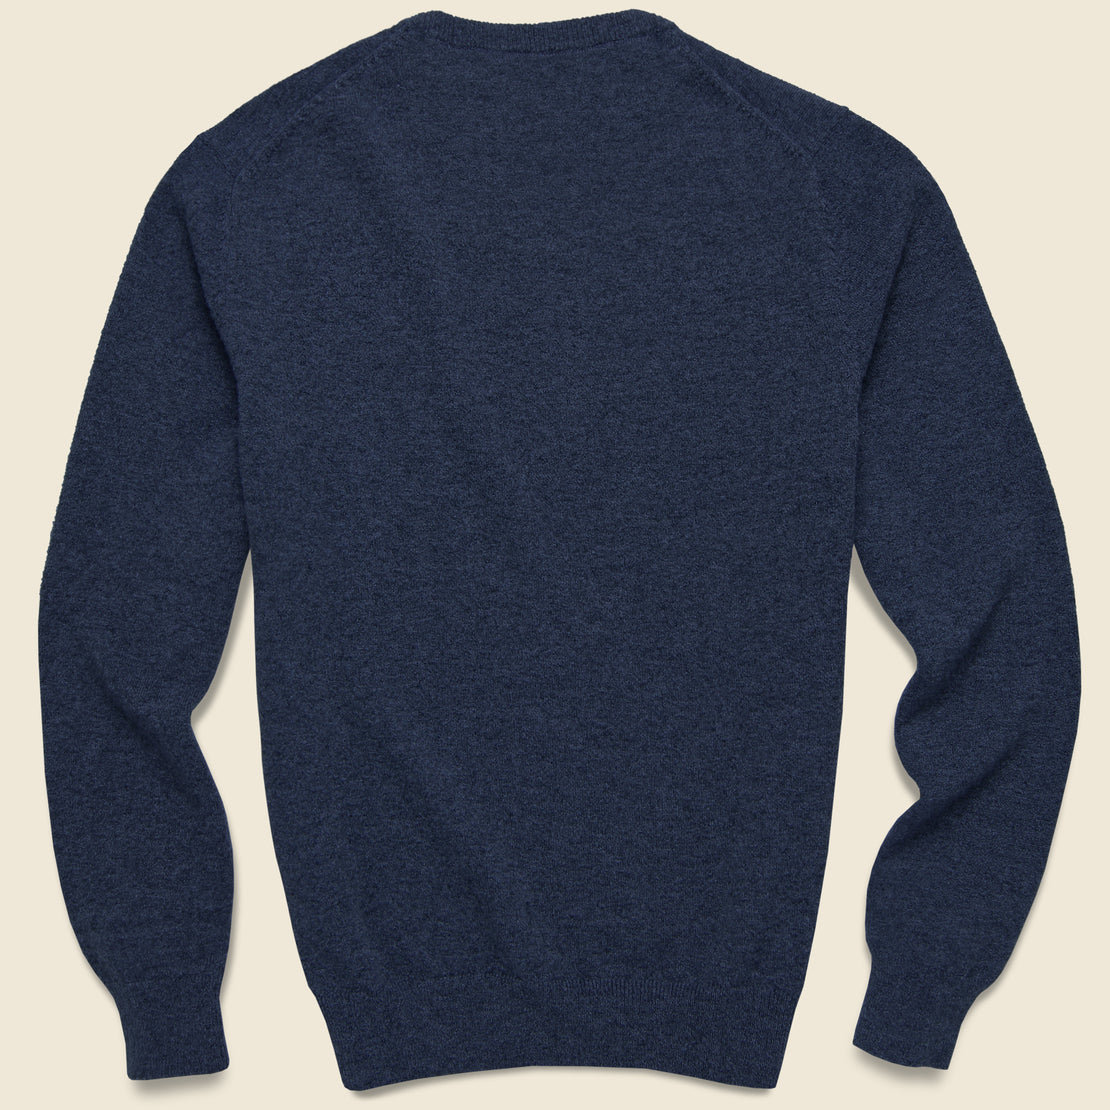 Jackson Crew Sweater - Navy Heather - Faherty - STAG Provisions - Tops - Sweater